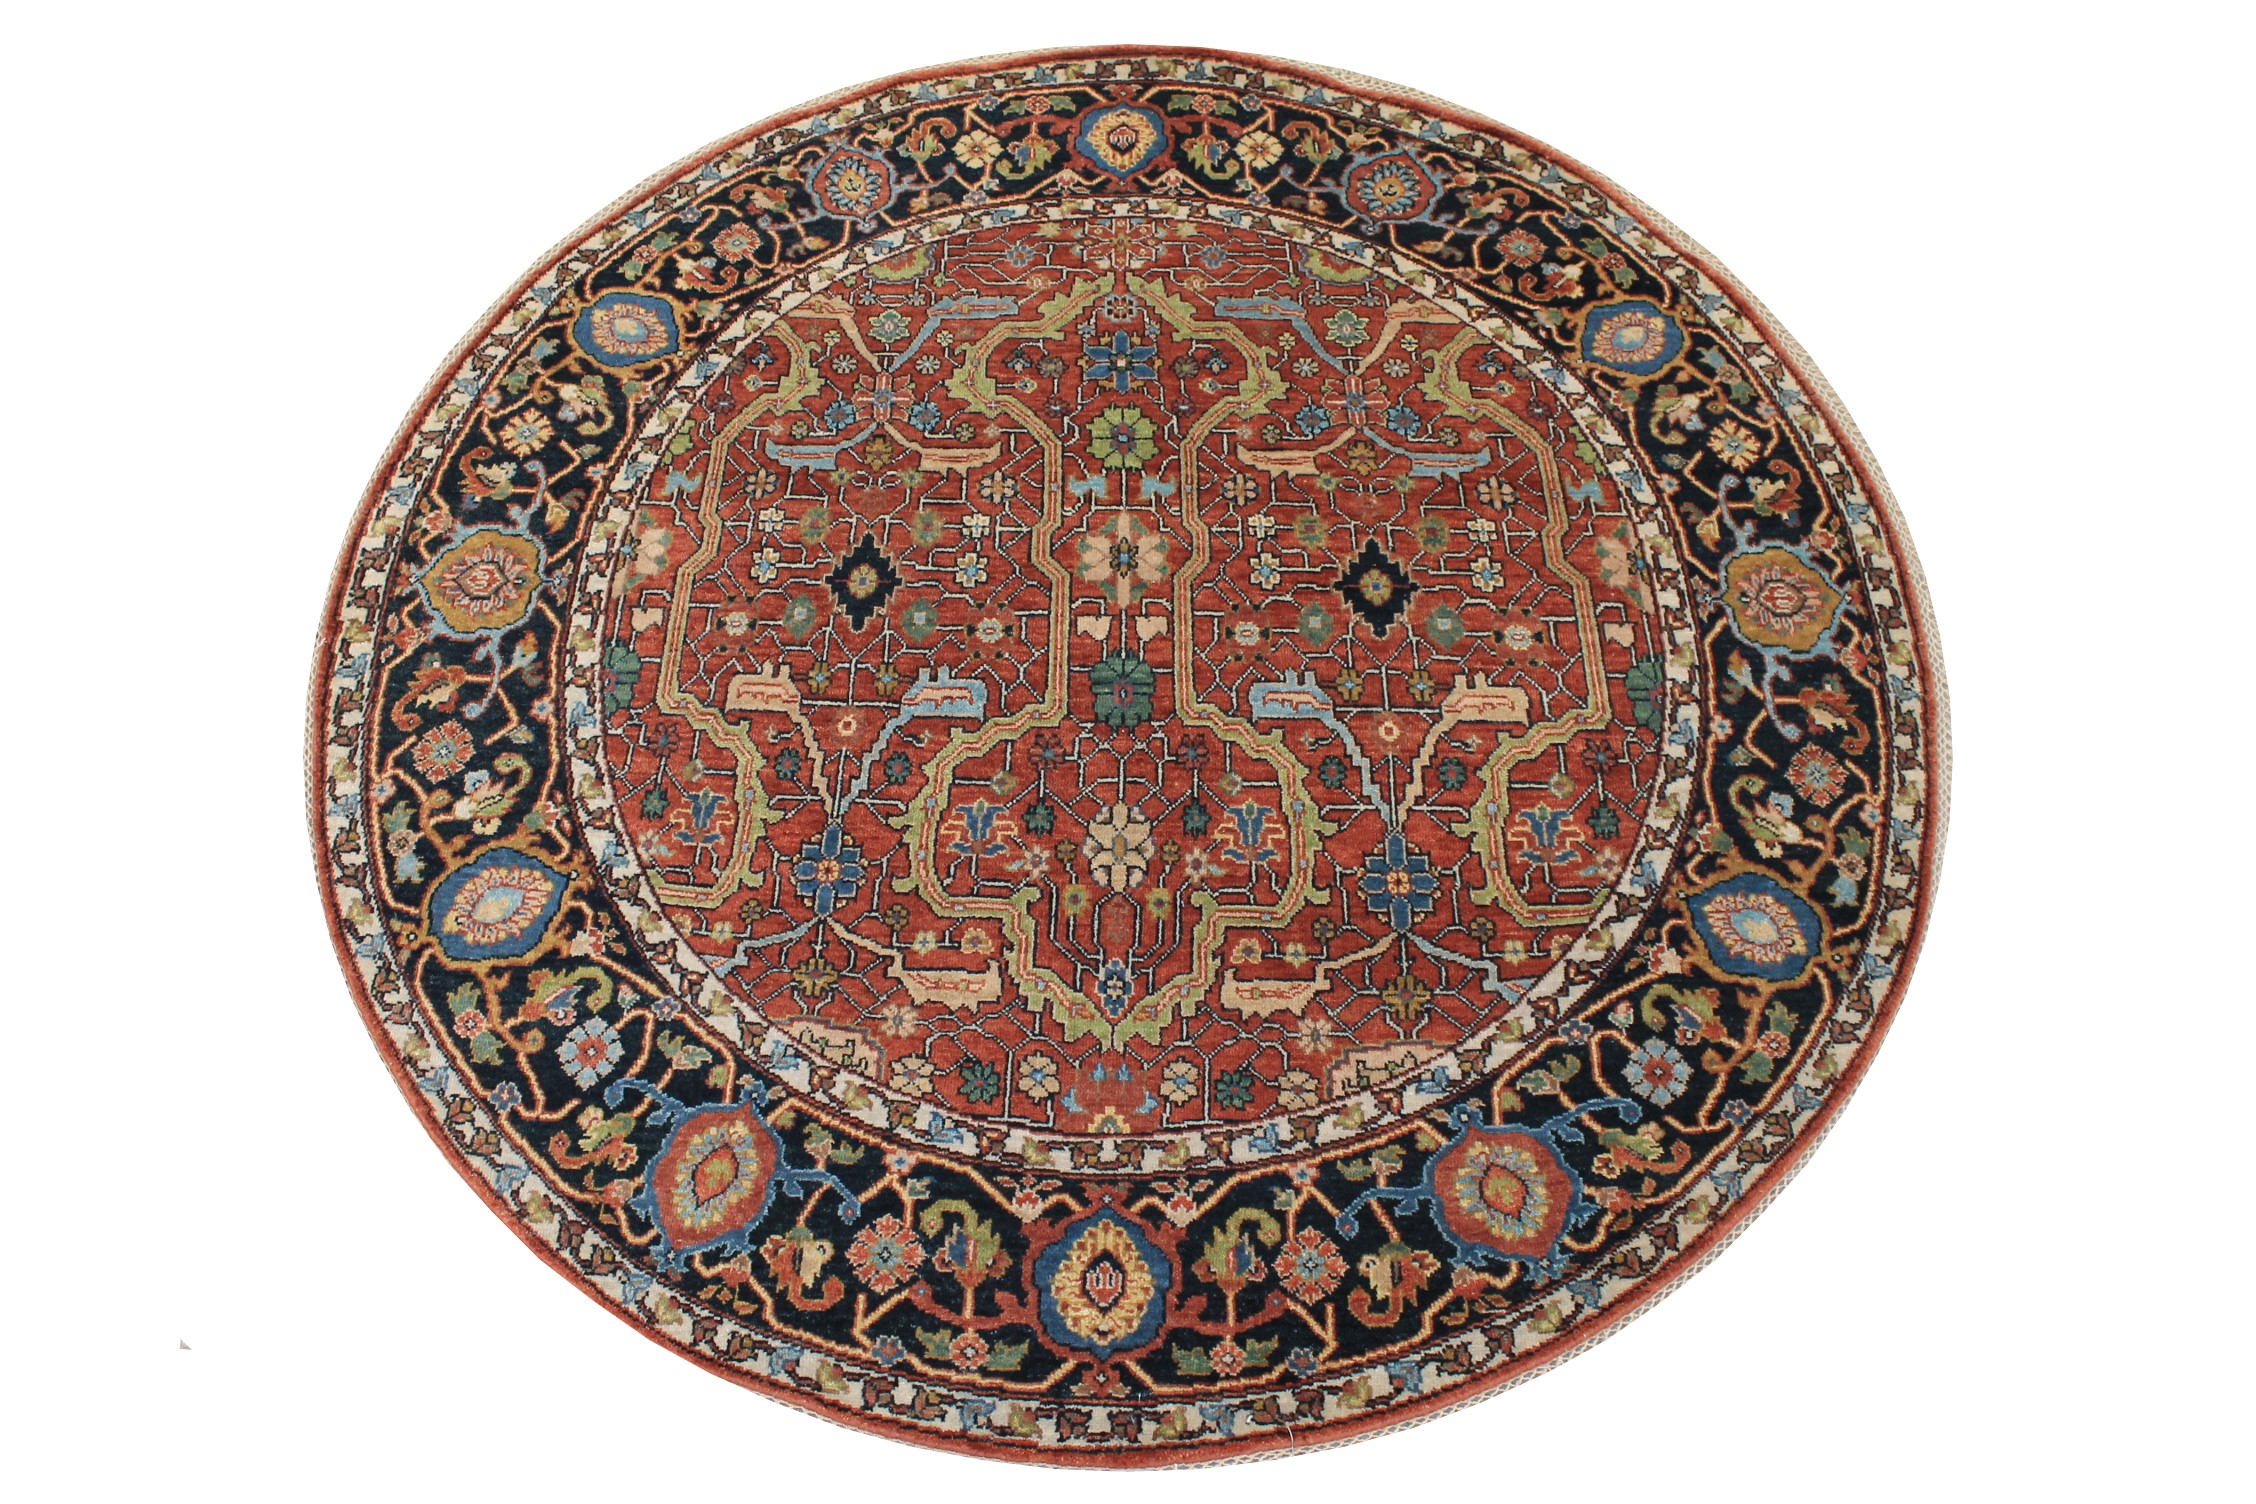 6 ft. - 7 ft. Round & Square Heriz/Serapi Hand Knotted Wool Area Rug - MR026502